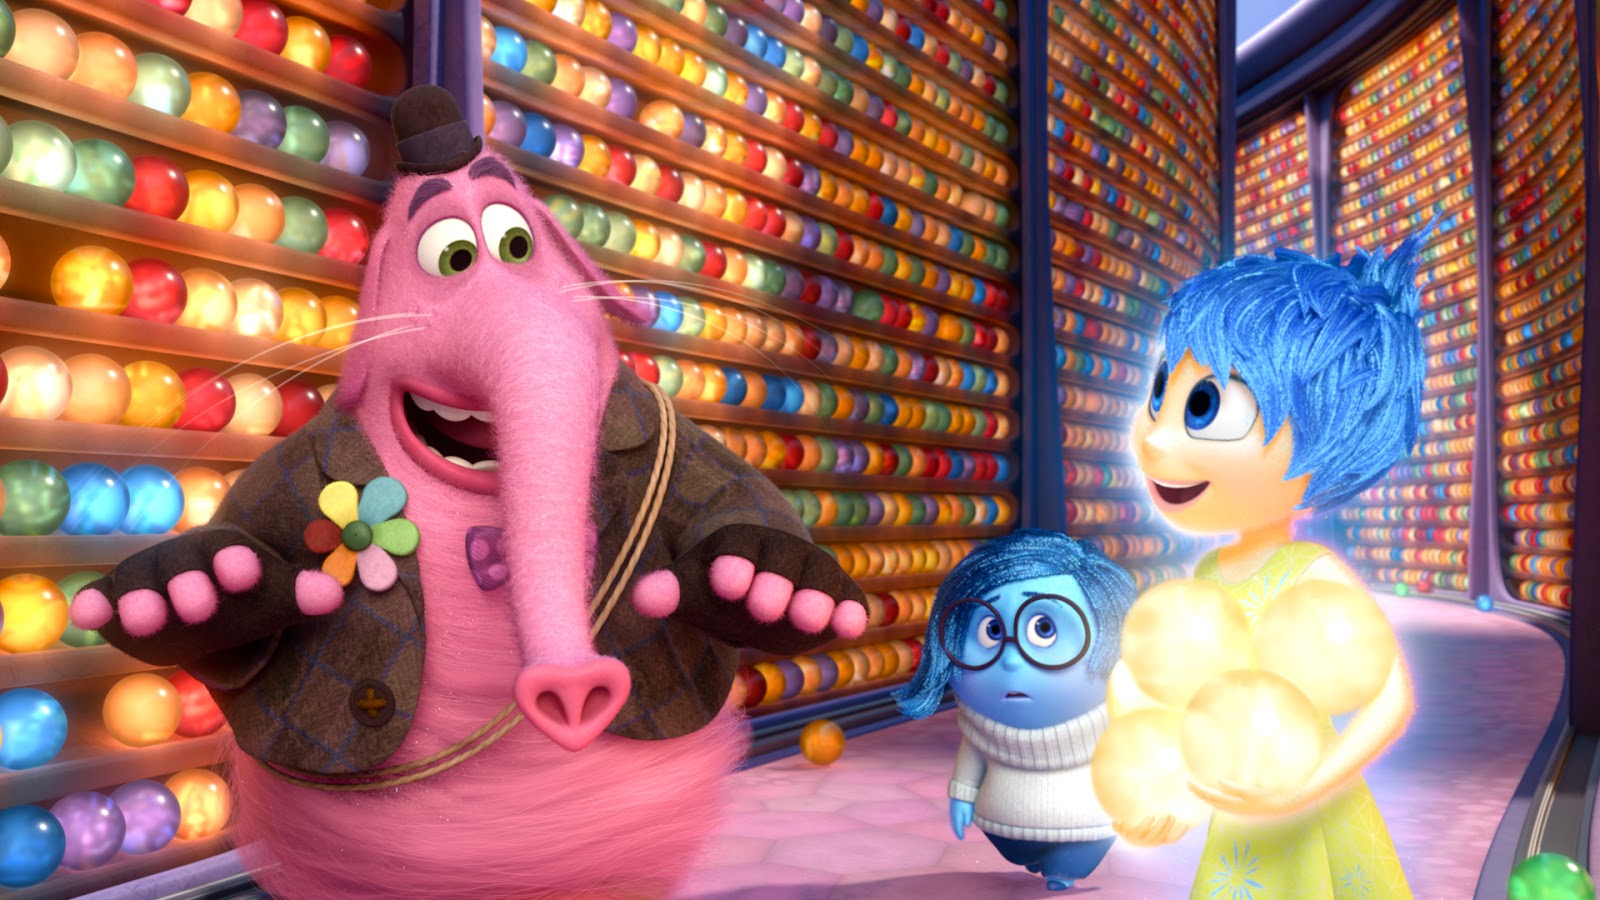 Bing Bong Captures Hearts in 'Inside Out'